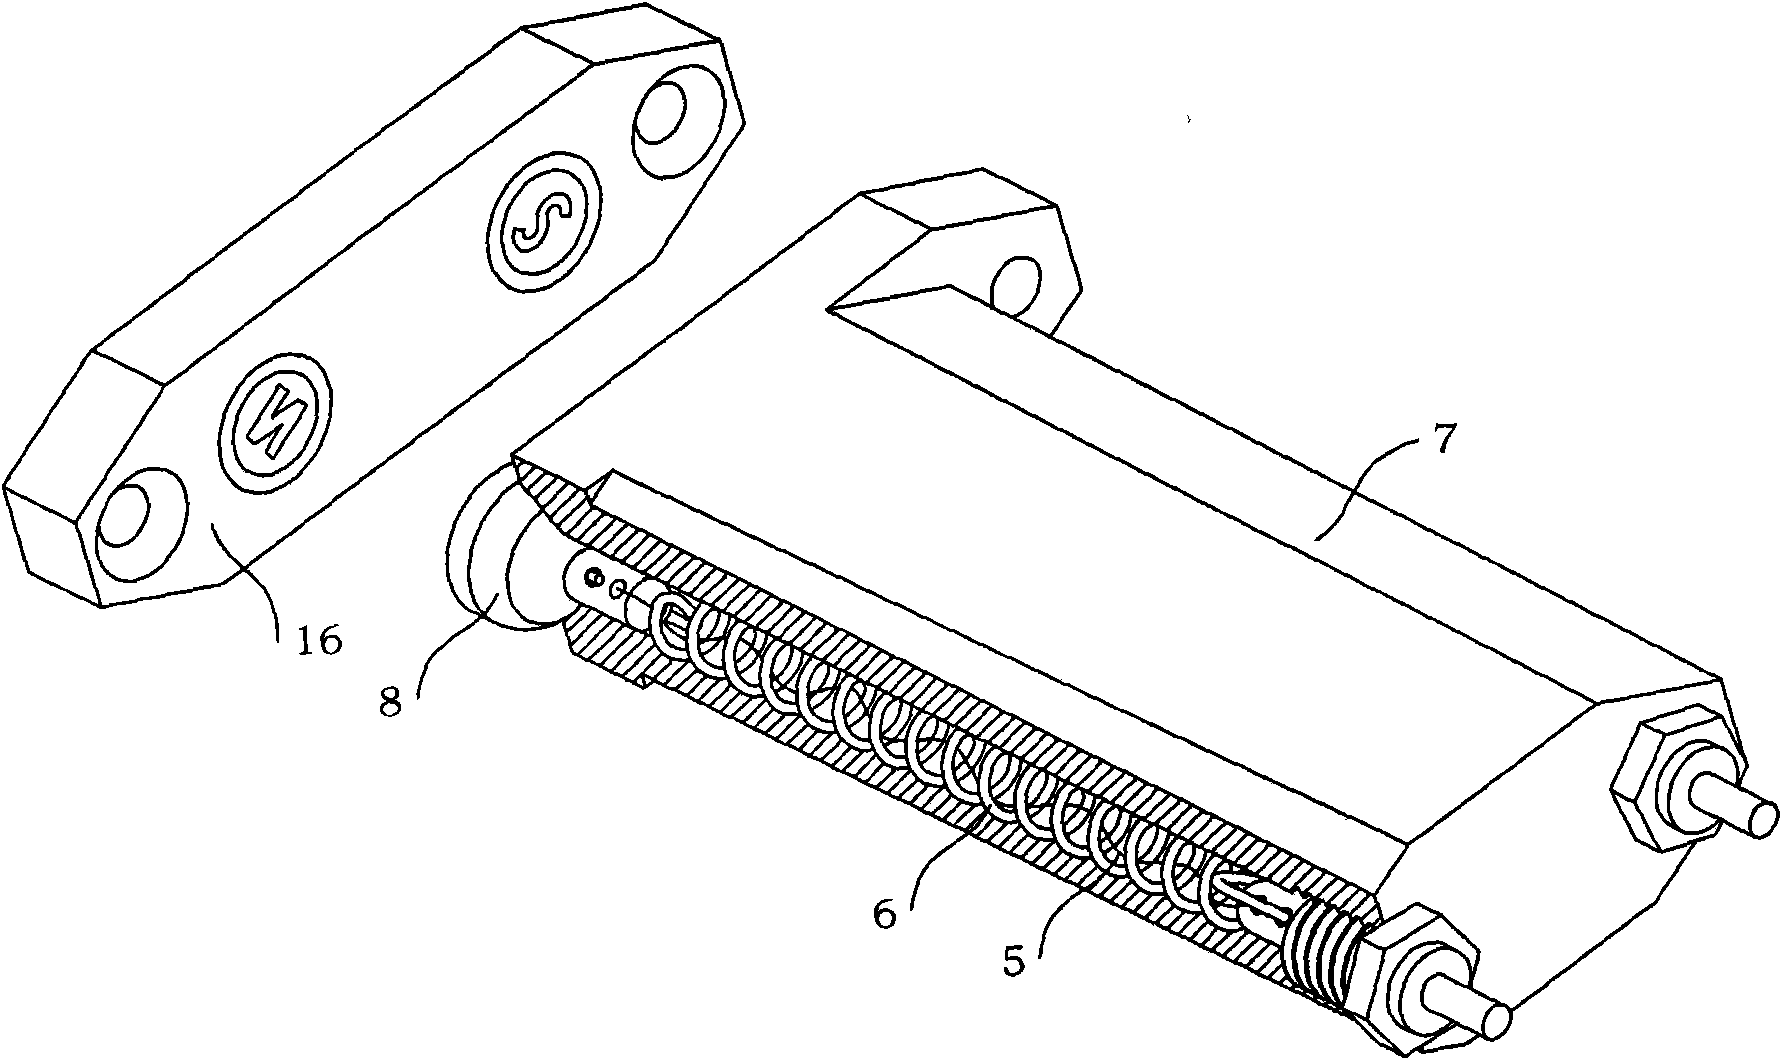 DC electrical docking device capable of automatically actuating and disconnecting